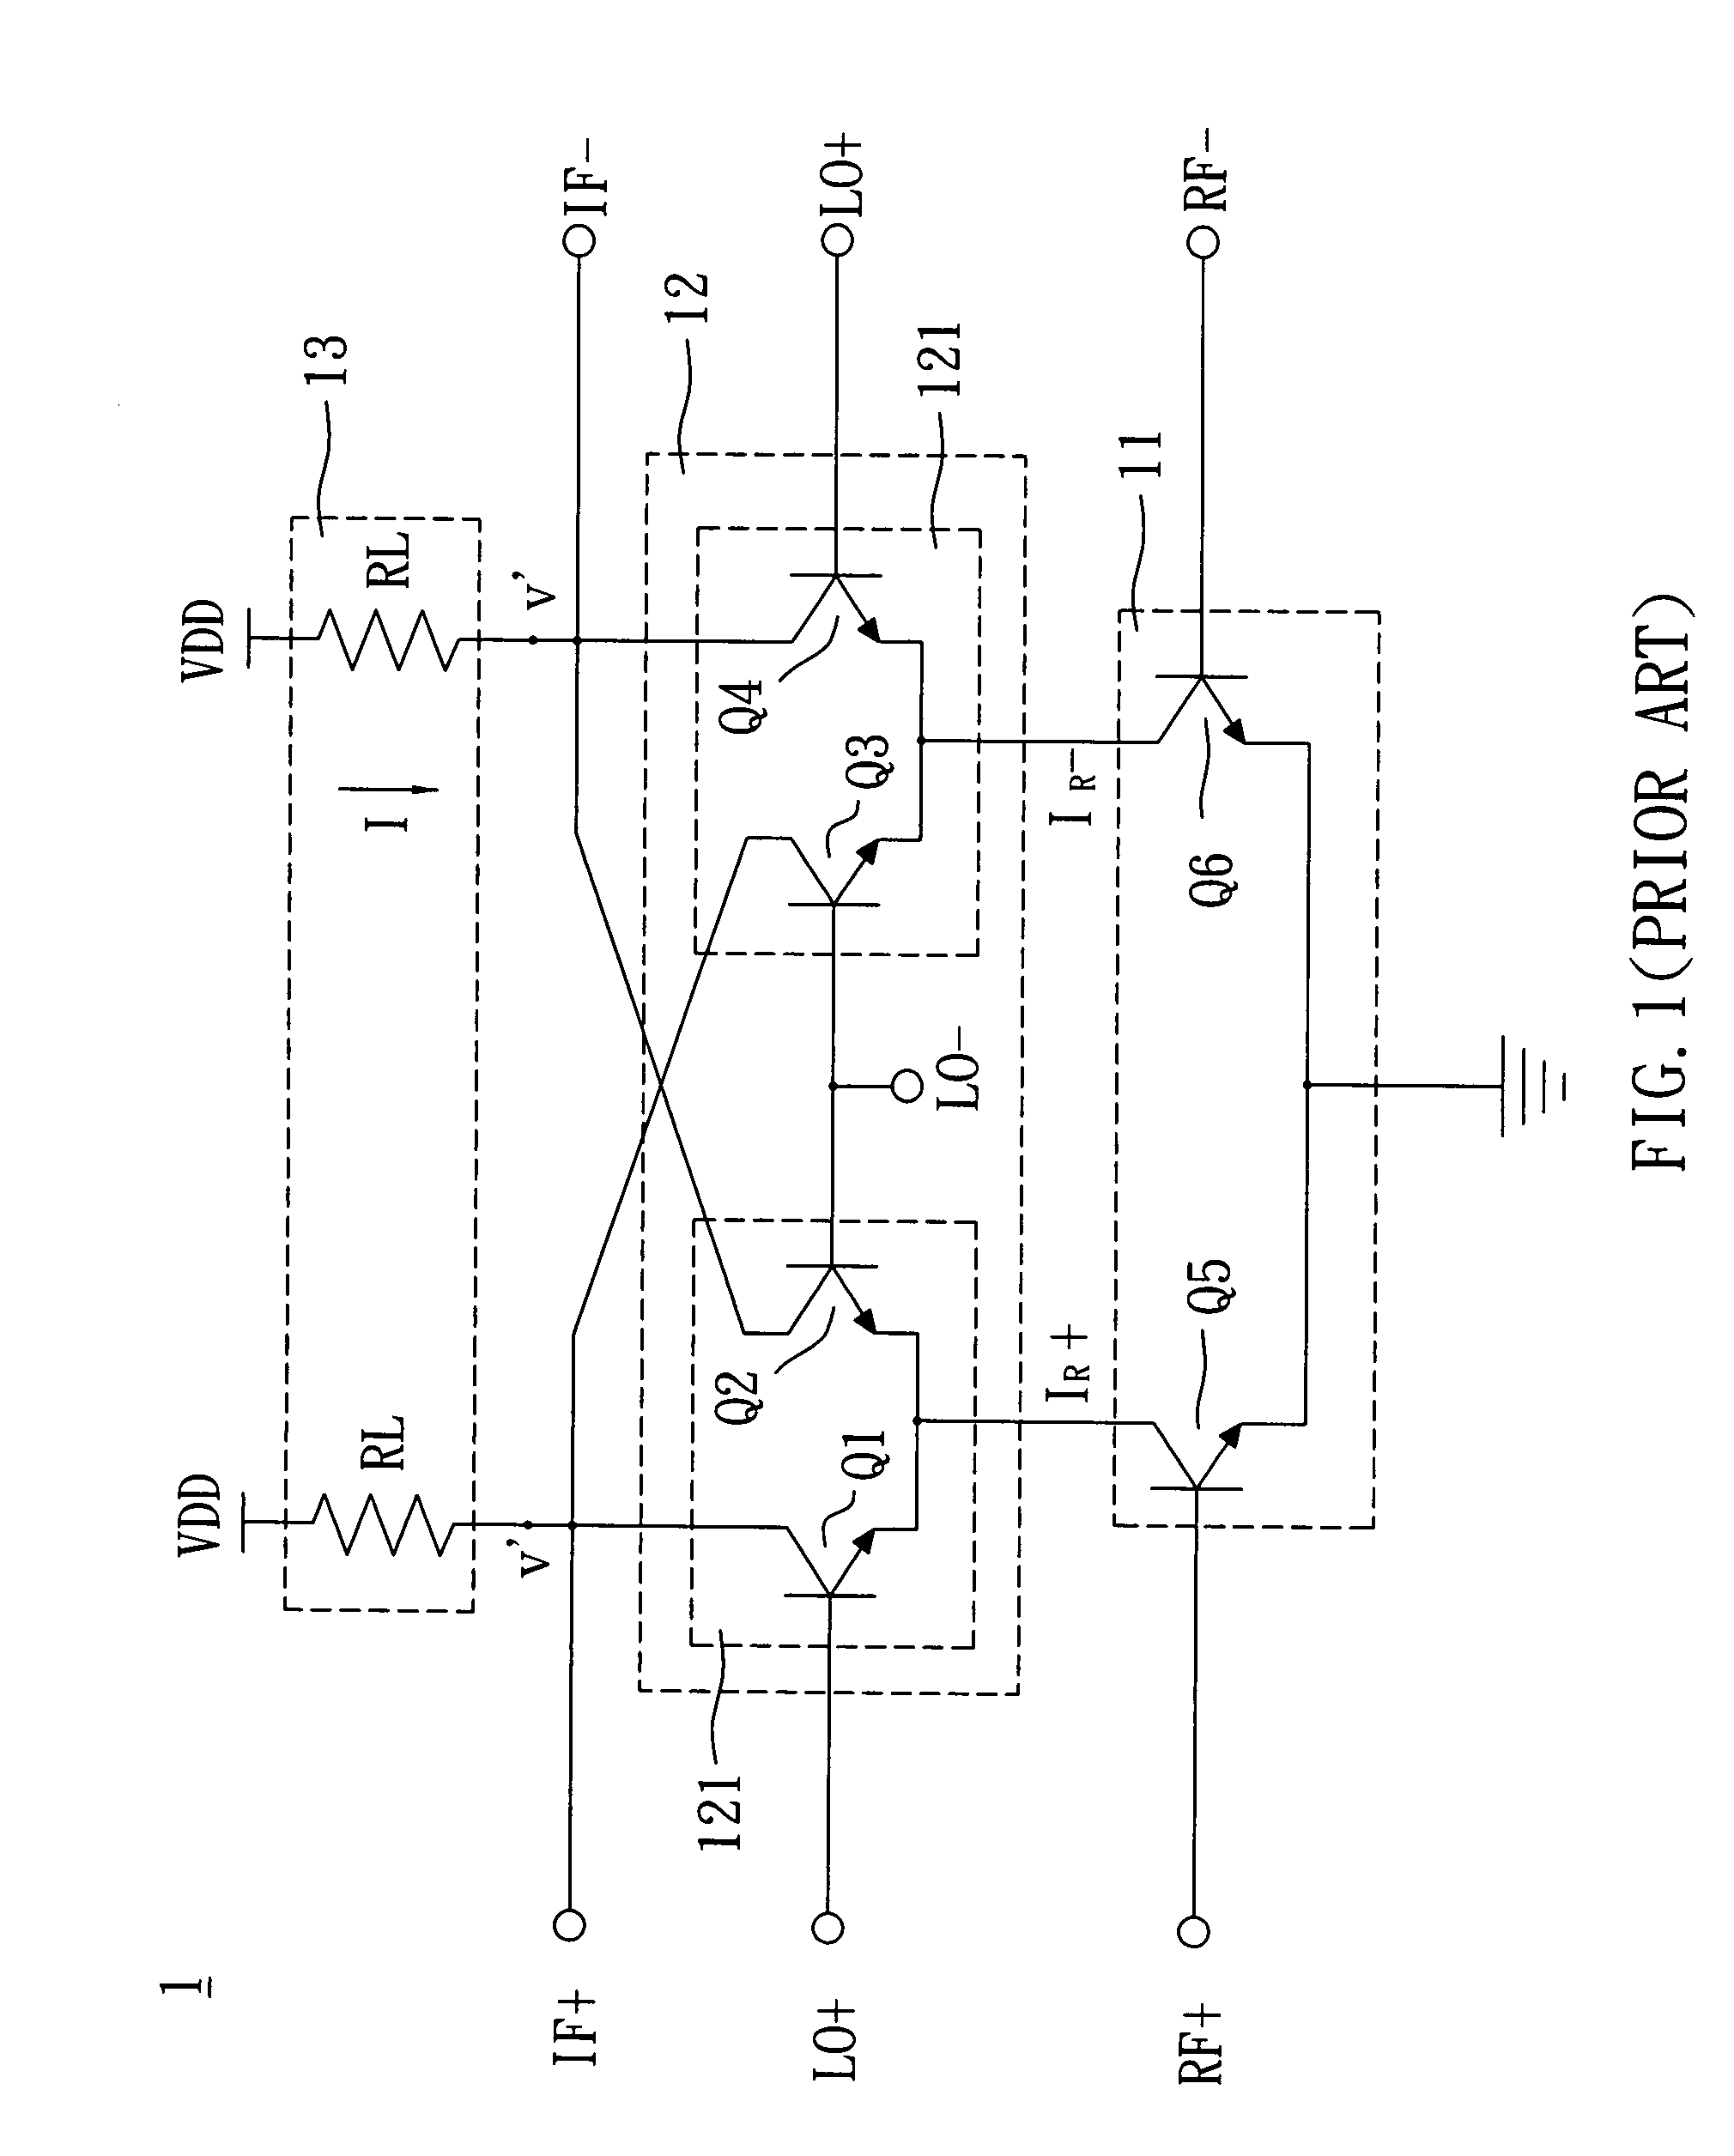 Conversion mixer with high impedance circuit